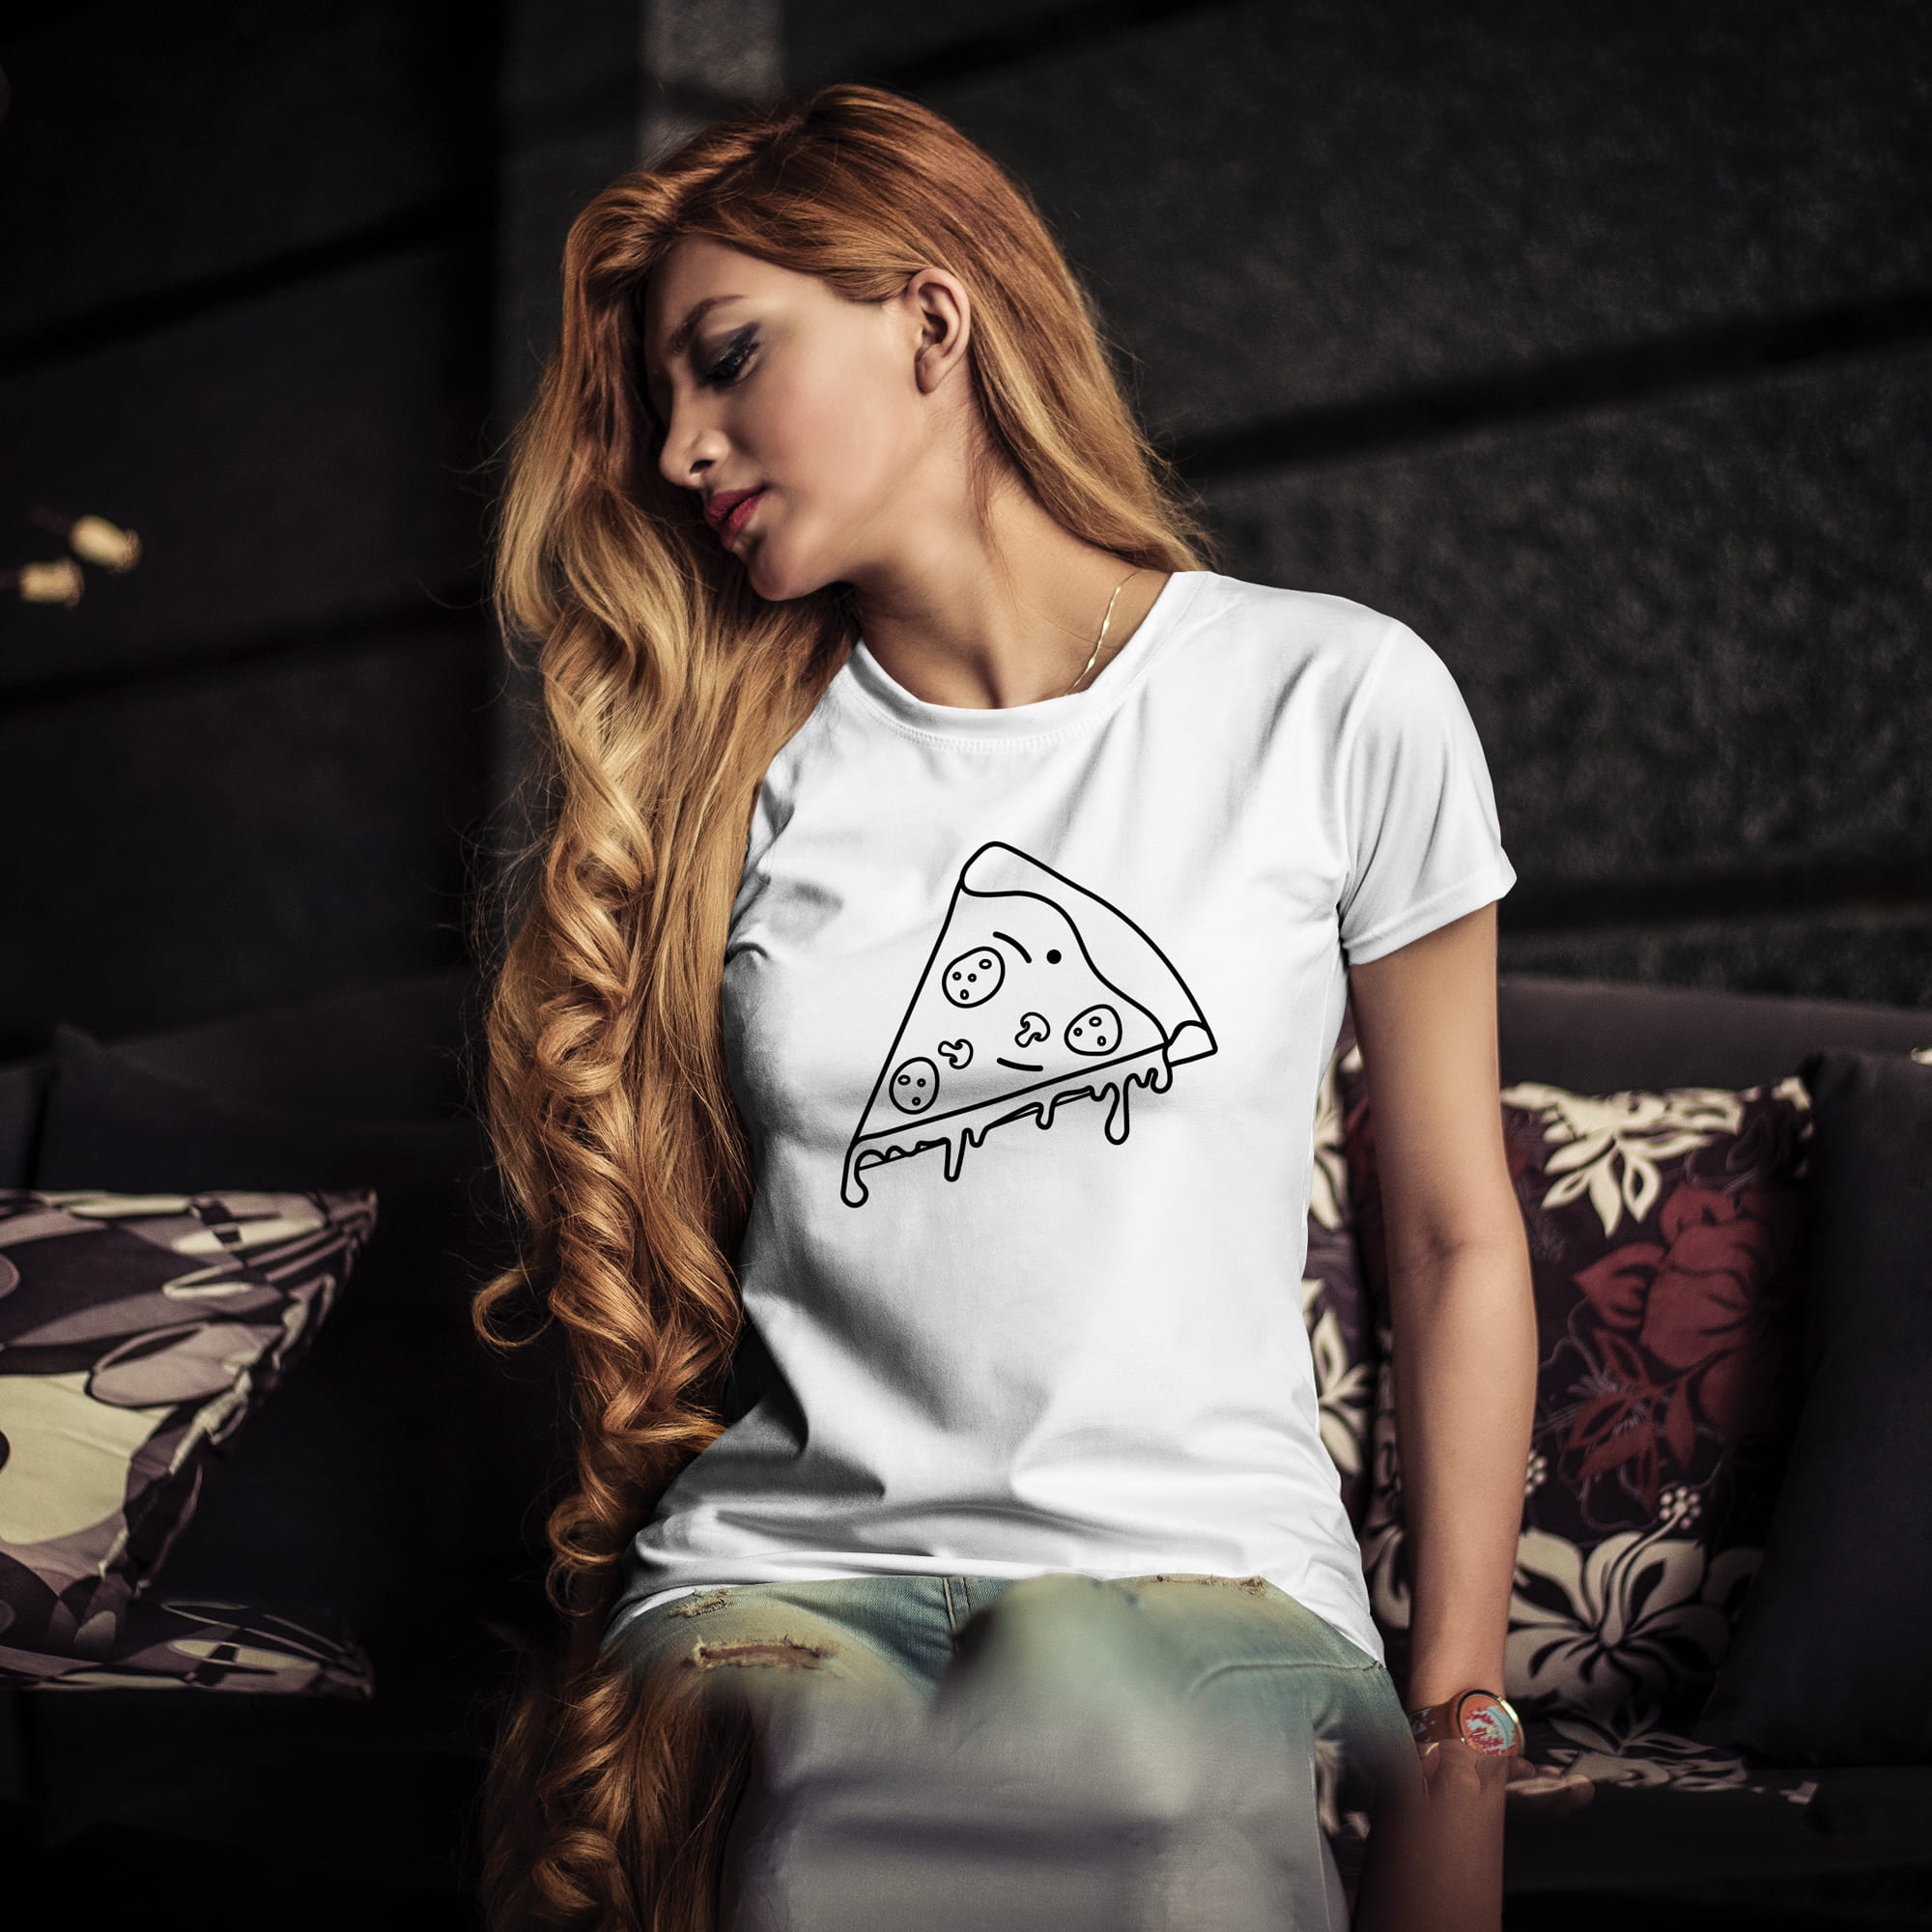 A piece of pizza is drawn on a white girl's t-shirt.